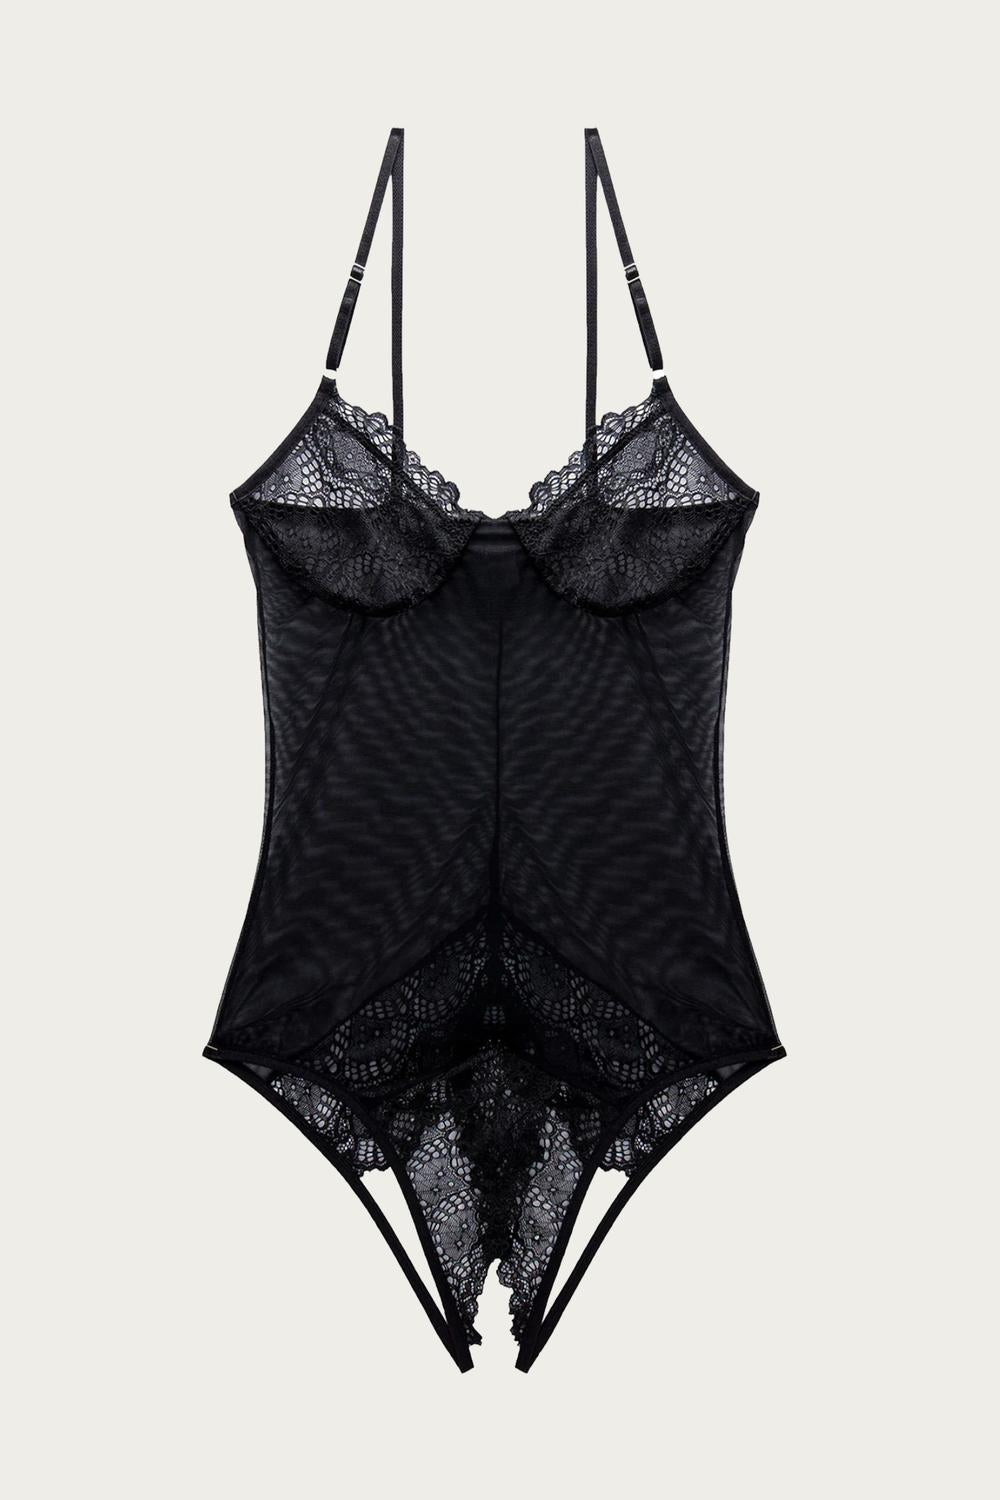 ONLY HEARTS Whisper Sweet Nothings Coucou Bodysuit in Black